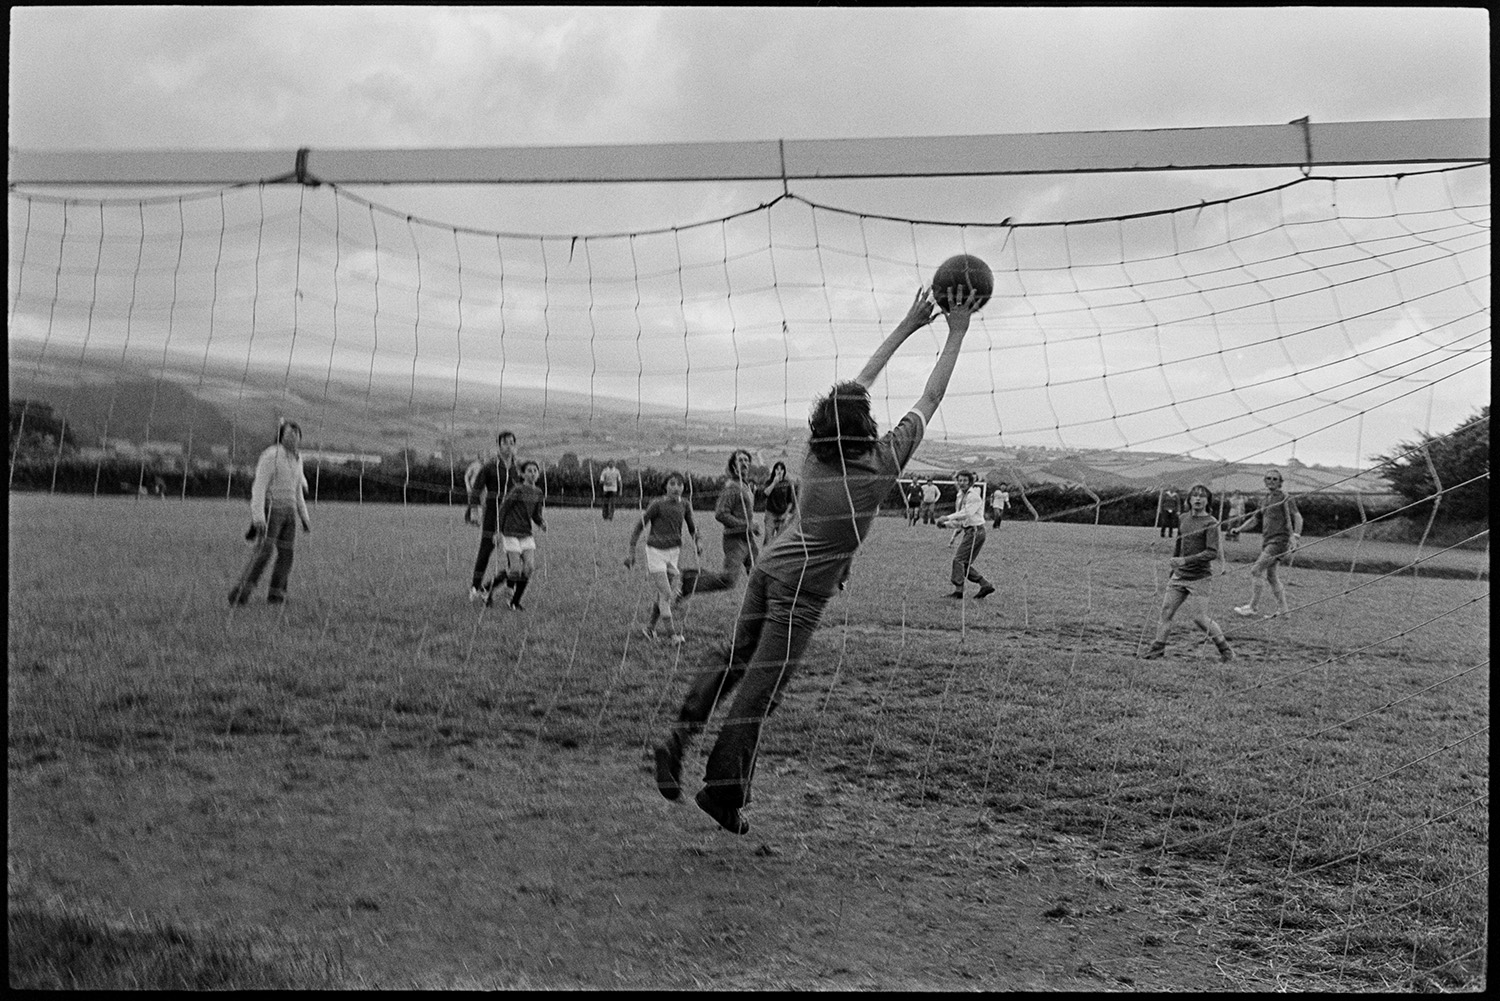 Jubilee football match with spectators. 
[Young men playing football in Atherington during the Silver Jubilee celebrations of Queen Elizabeth II. The goal keeper is jumping to save a goal. A rural landscape and some spectators are visible in the background.]